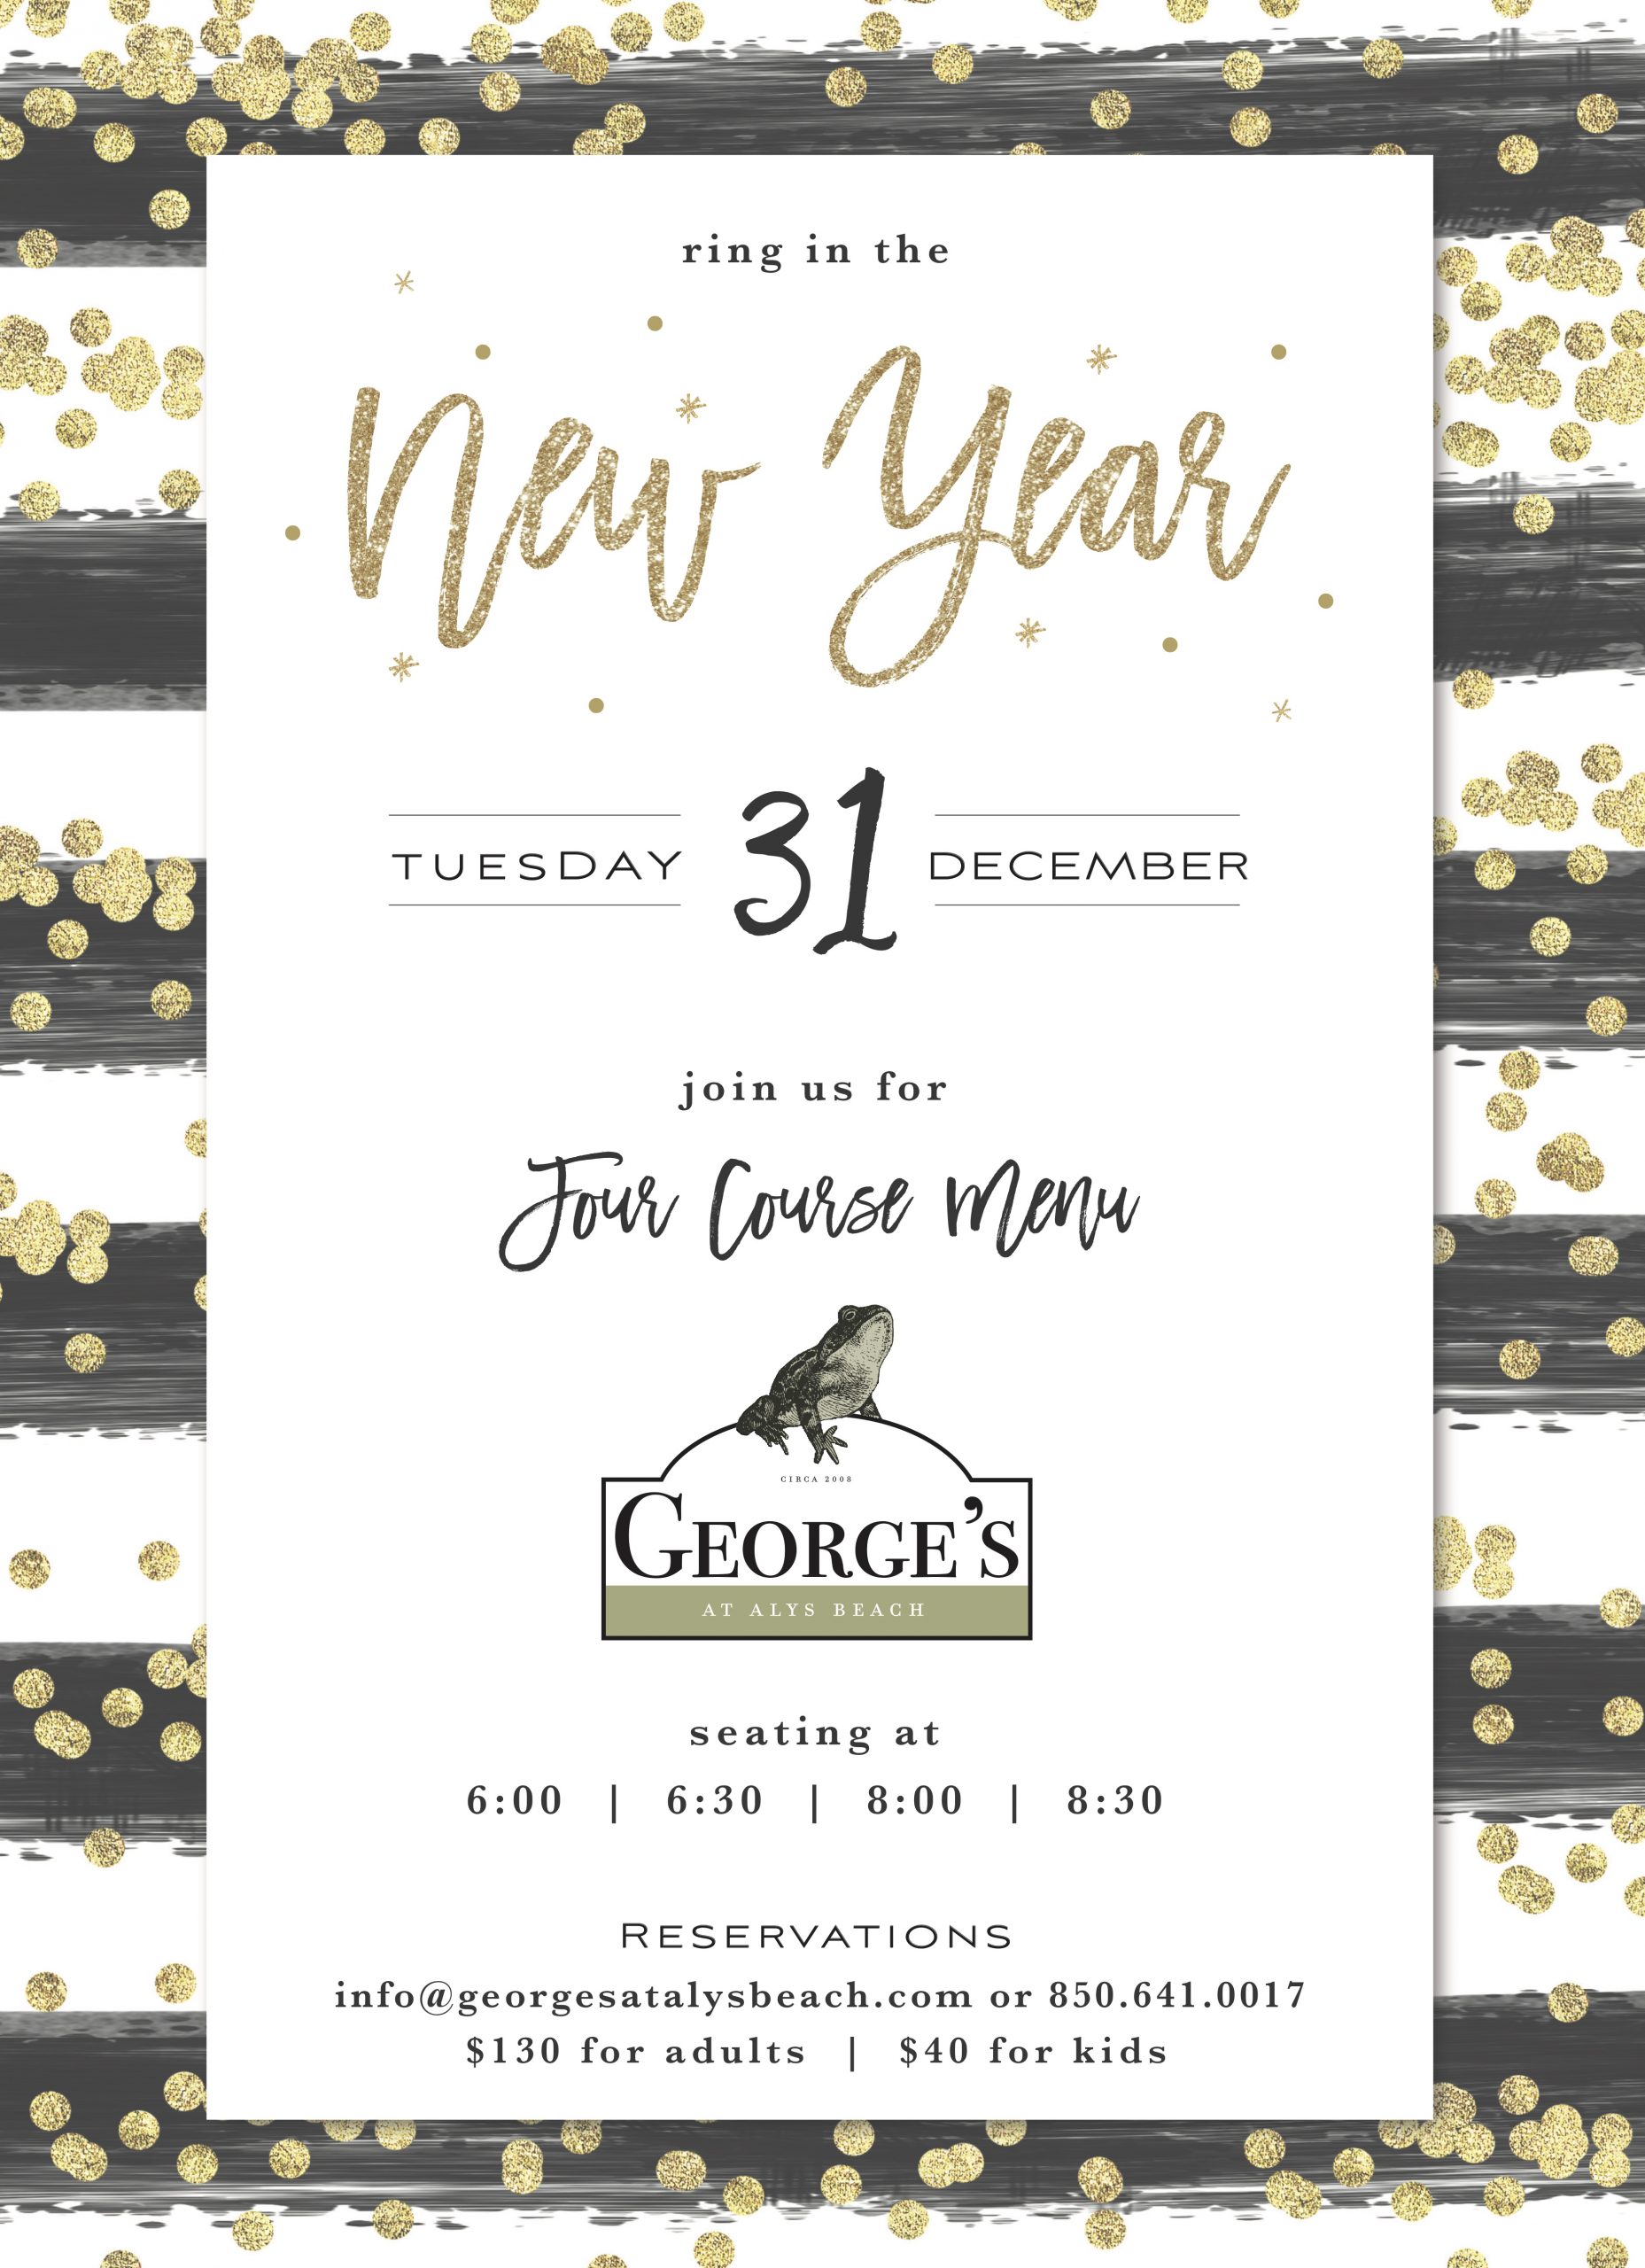 George’s at Alys Beach to Host New Year’s Eve Dinner